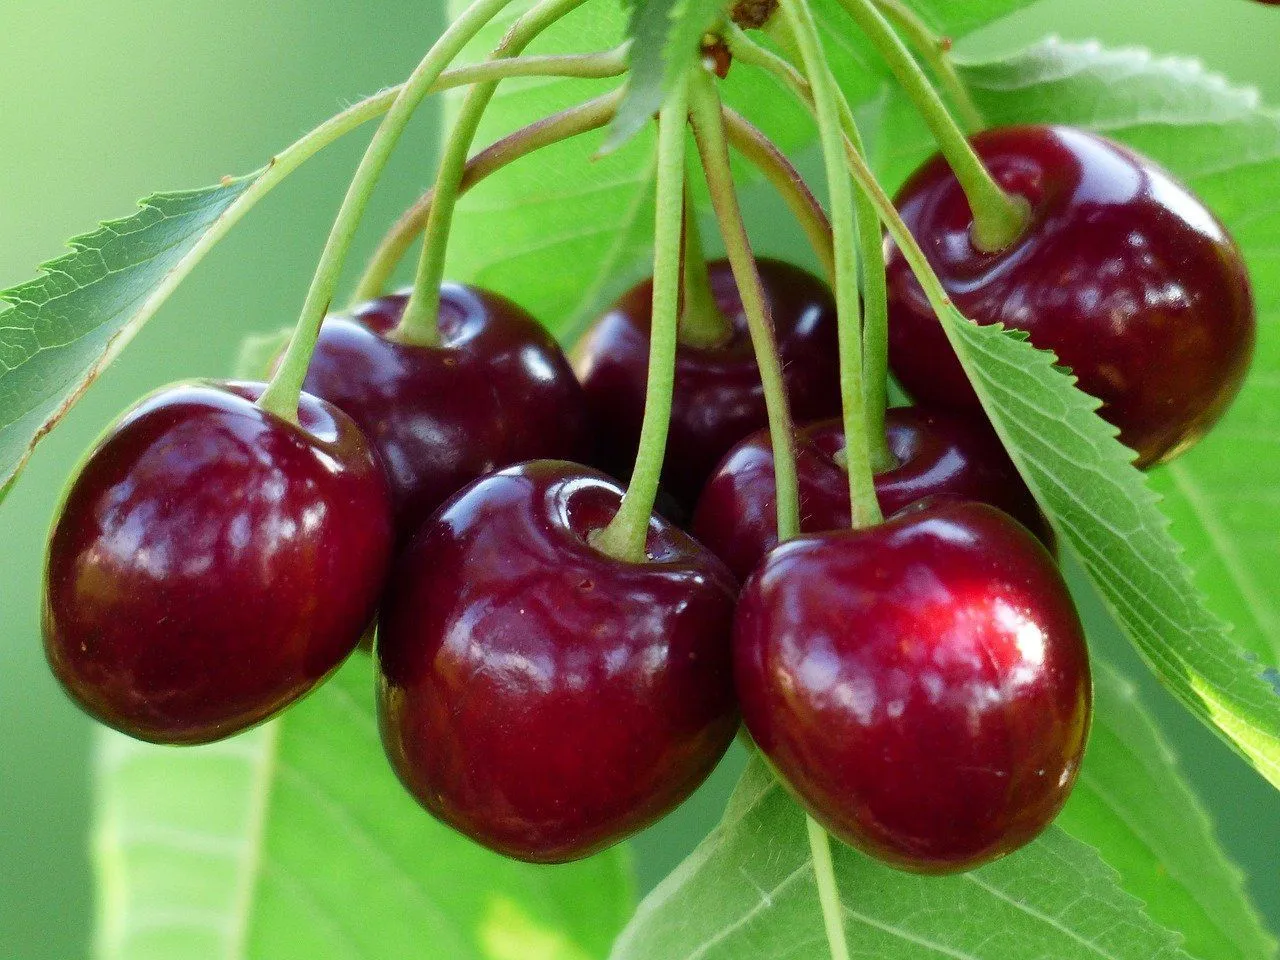 In the spring, flowers bloom and mature into a small fruit, chokecherry berries.